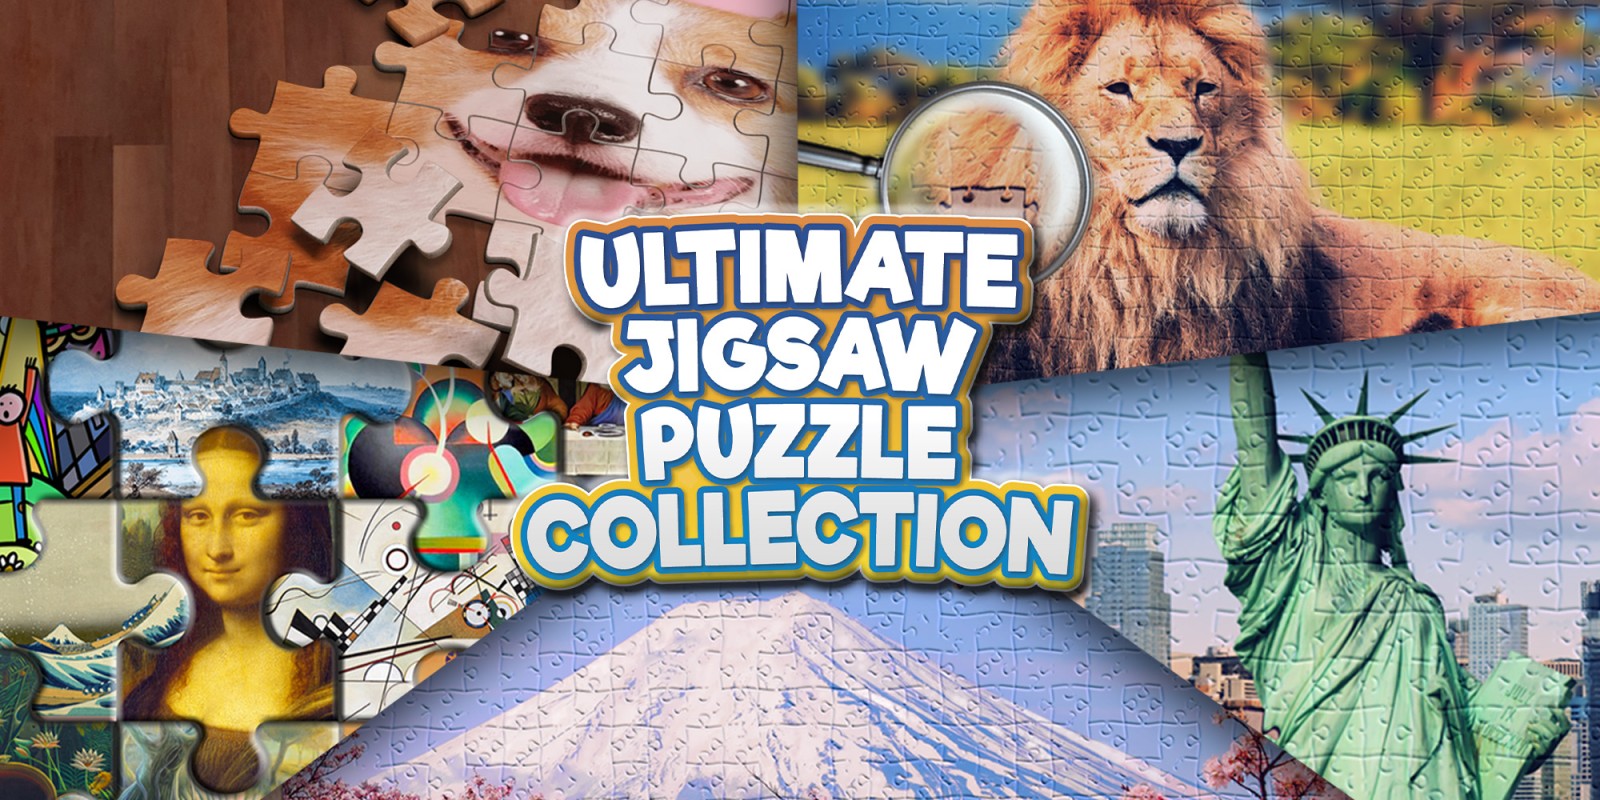 Ultimate Jigsaw Puzzle Collection